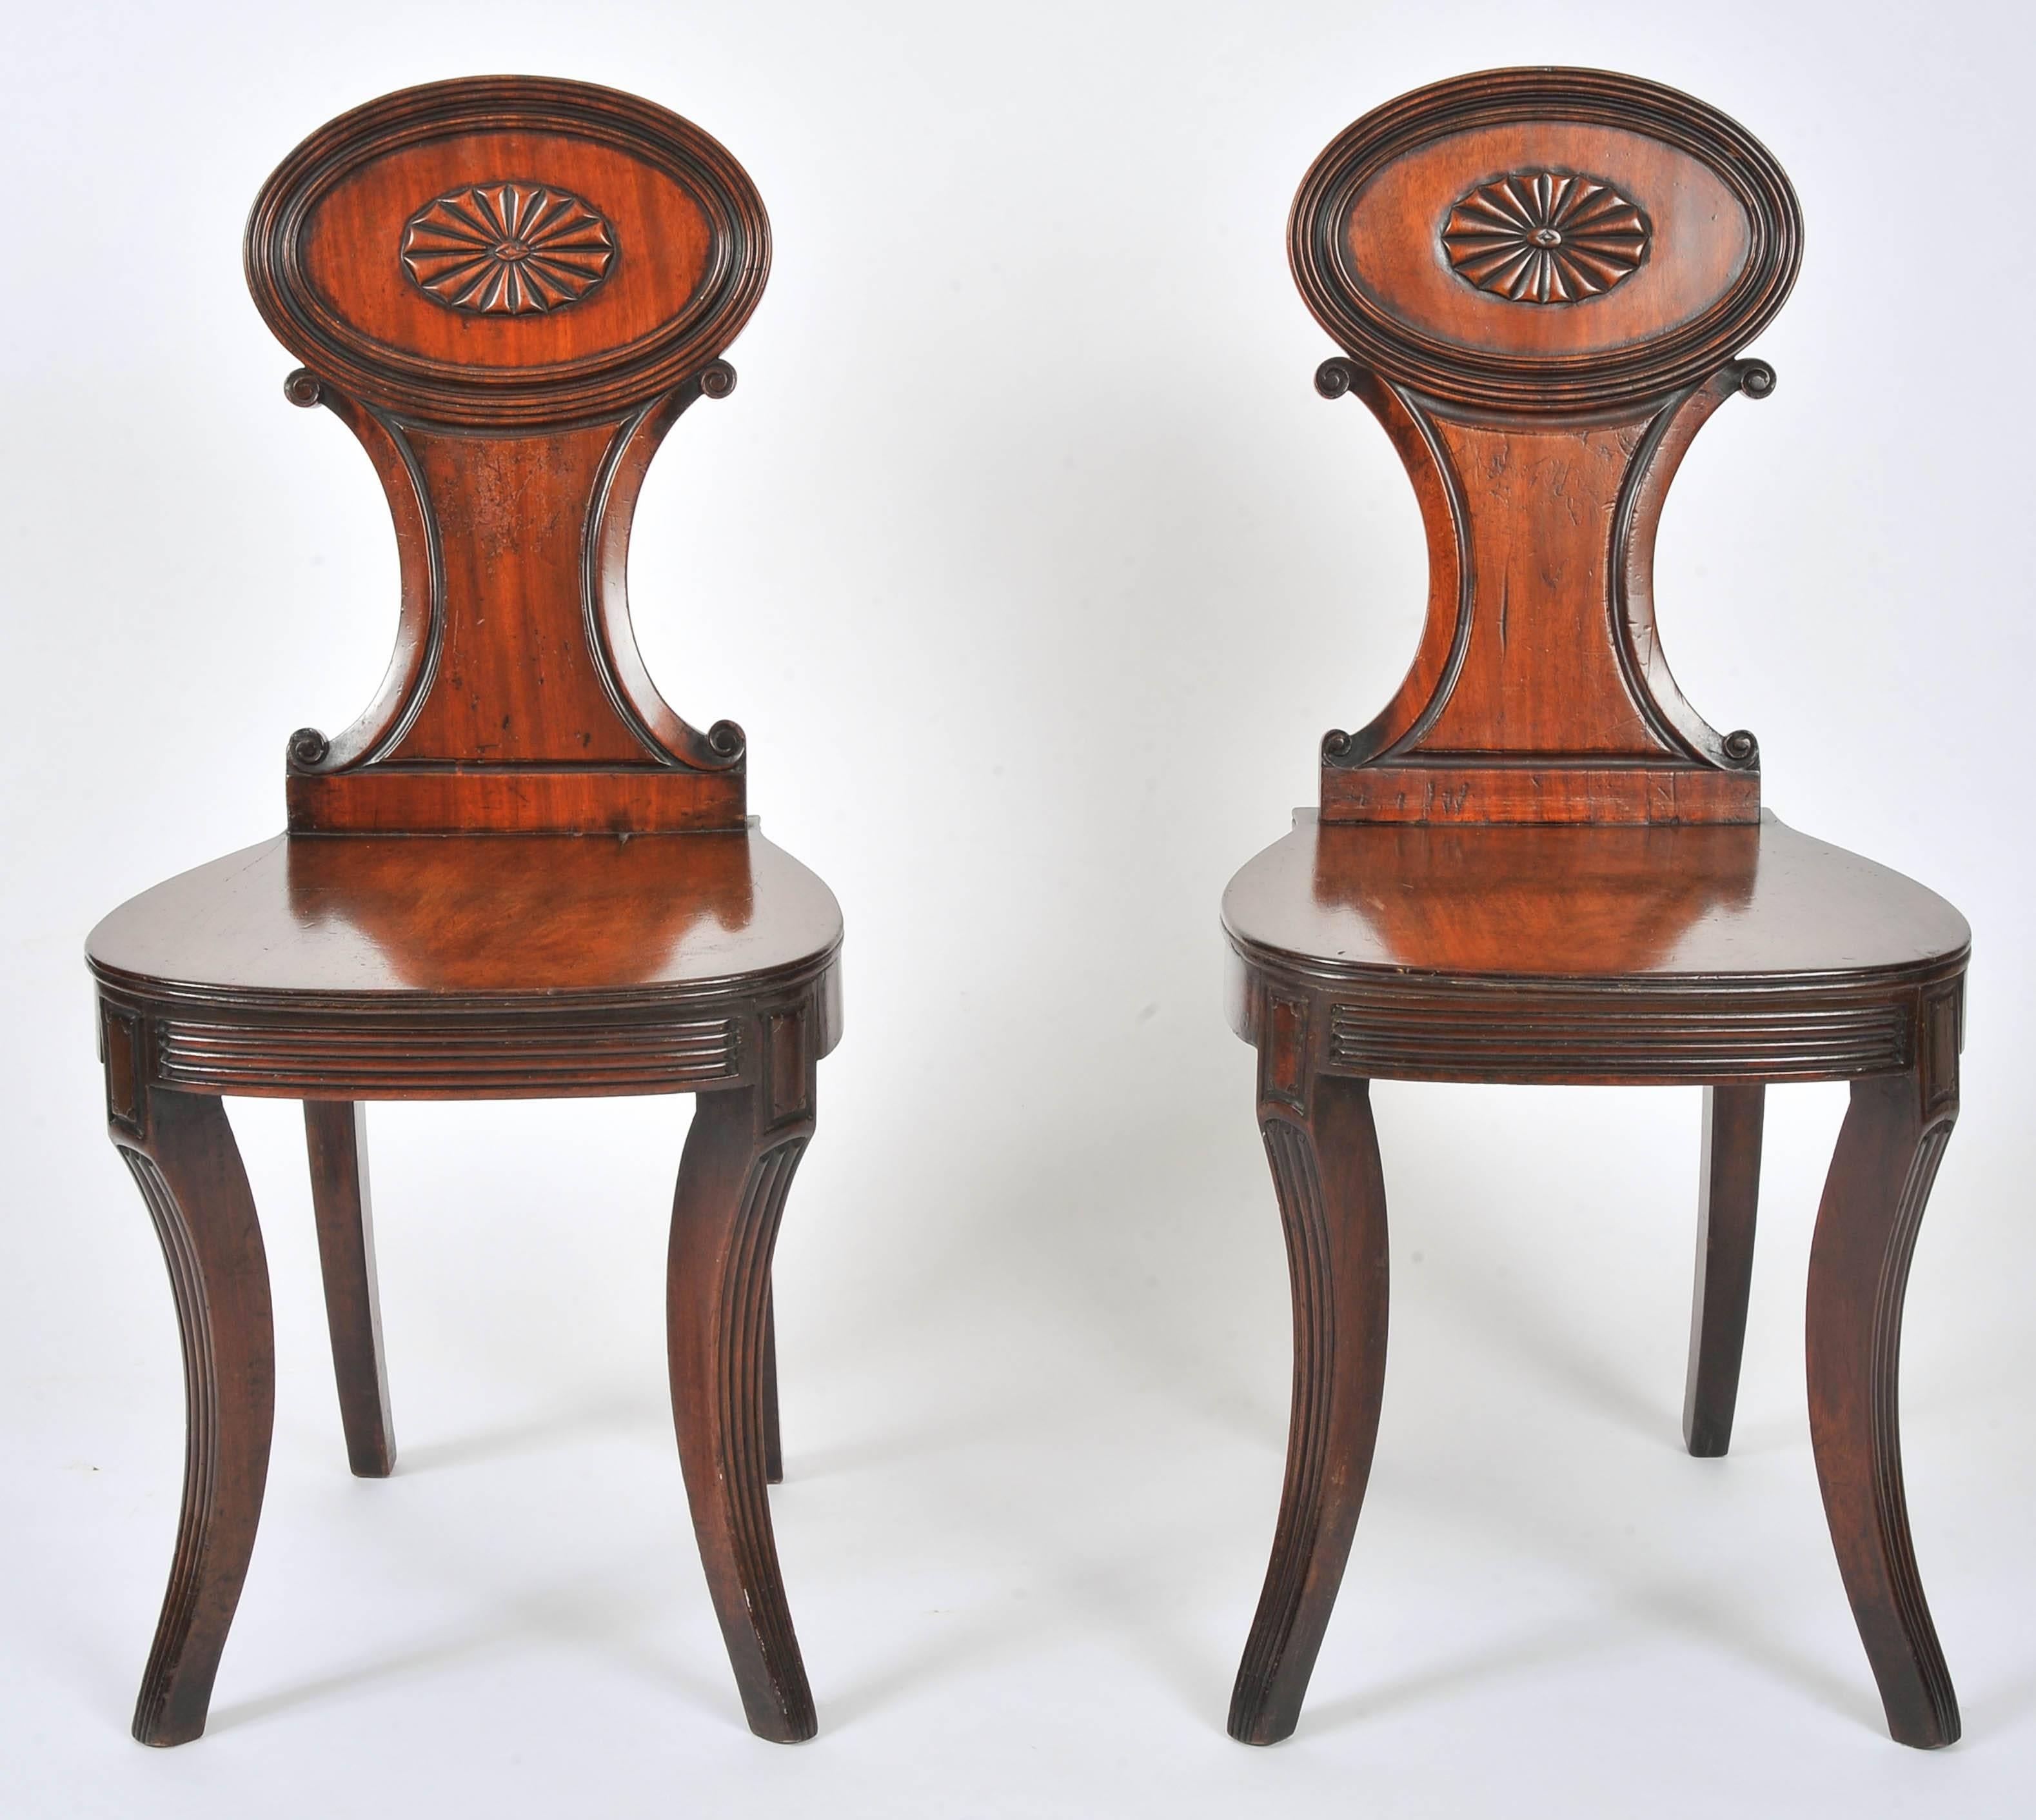 This lovely pair of 19th century. Carved mahogany hall chairs features a shaped back splat that has a decorative oval top section with a medallion centrepiece. The chairs feature sabre front and back swept legs and hide shaped seats. Each chair